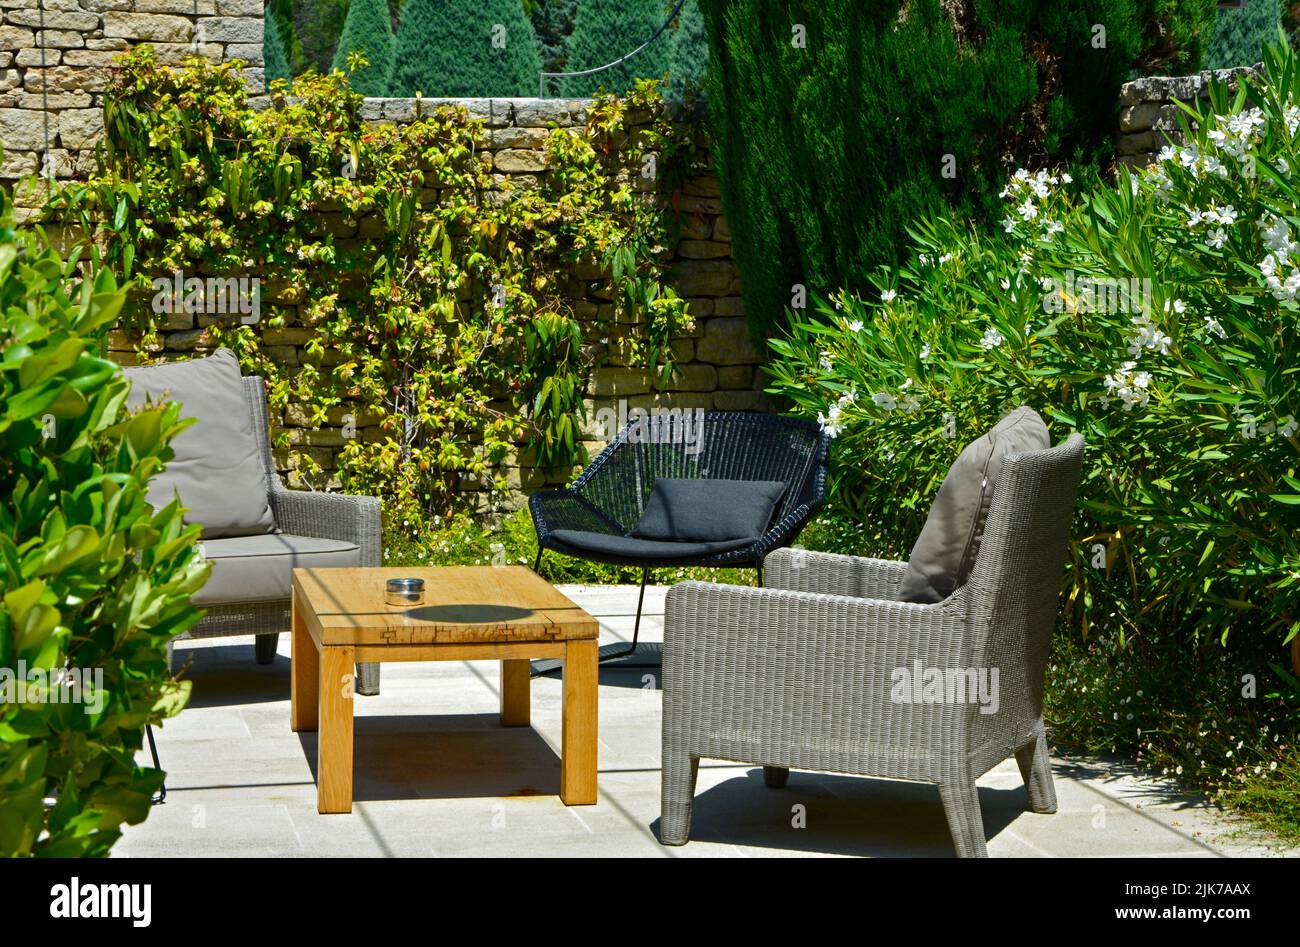 garden furniture on the patio garden, armchairs and a coffee table on the sunny patio Stock Photo